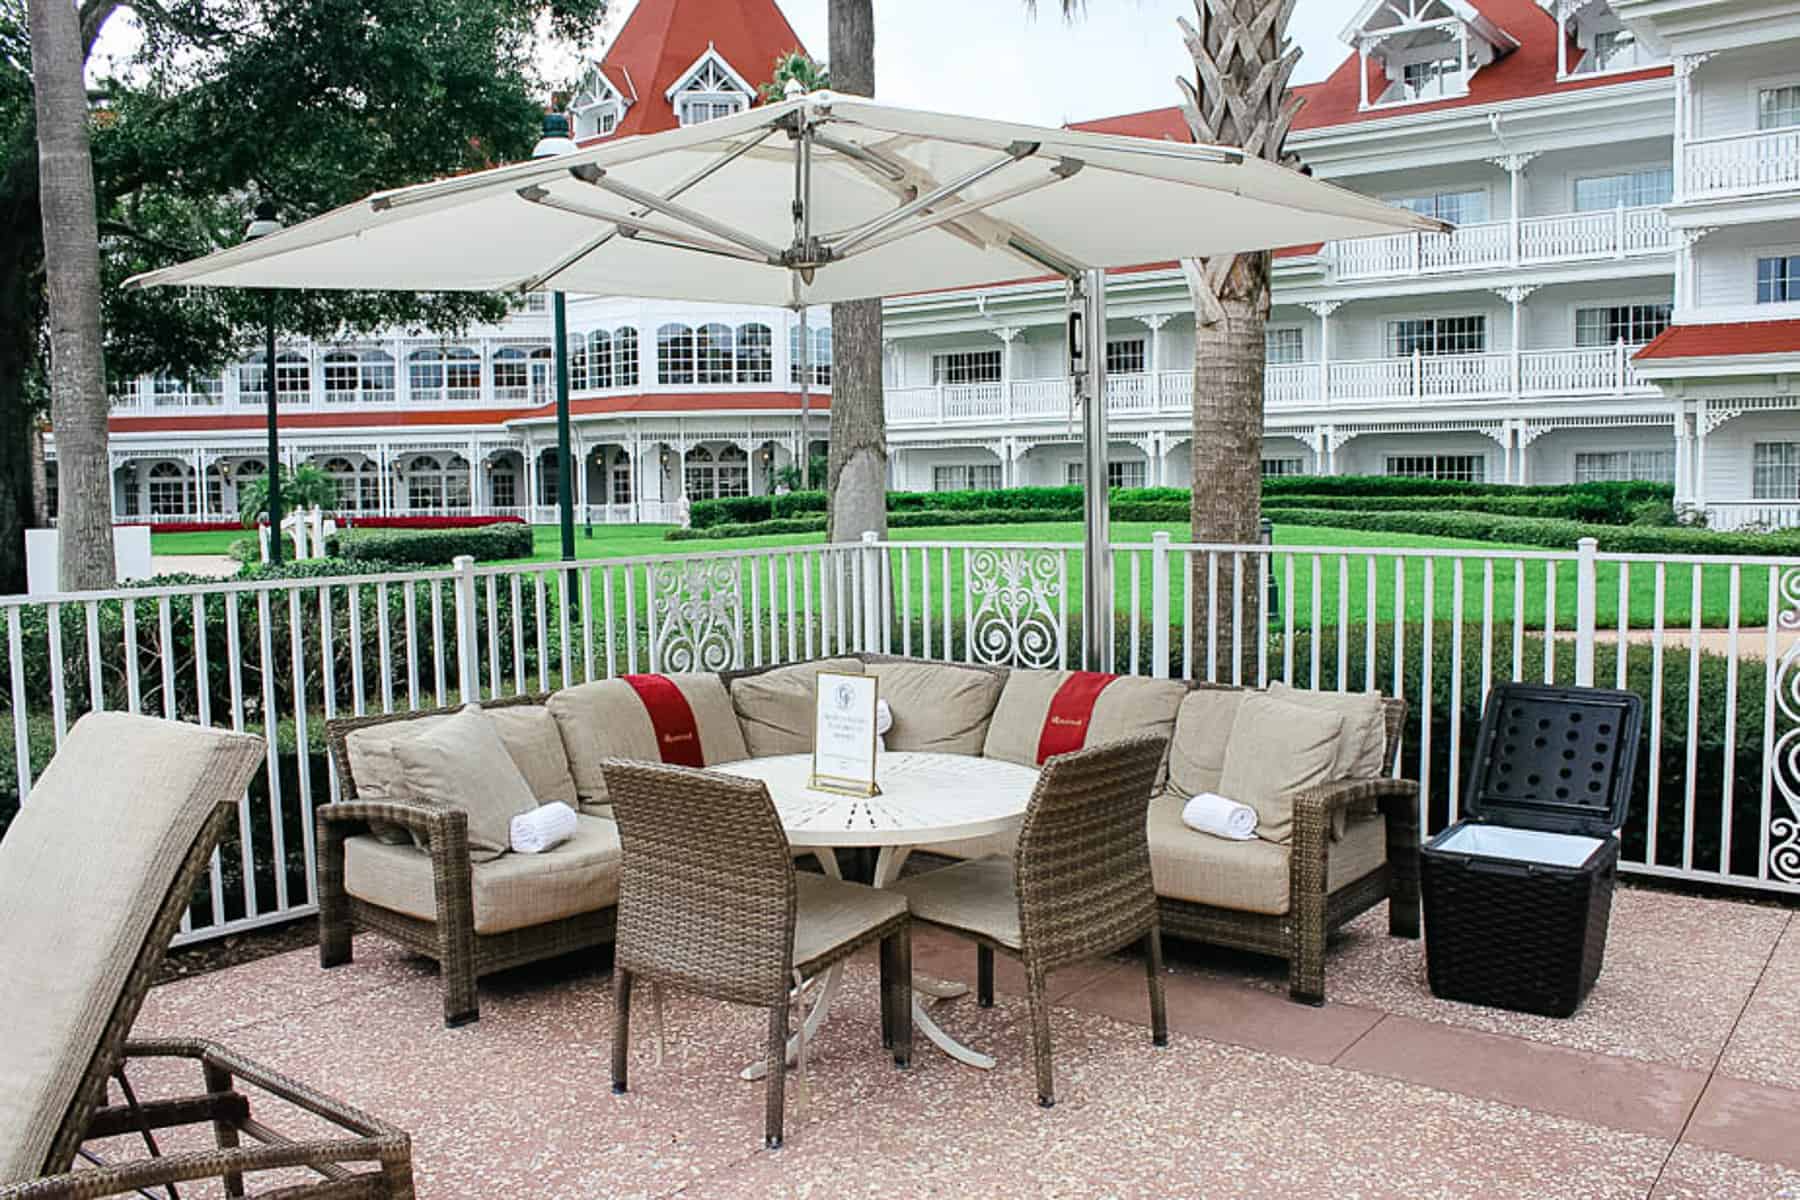 a cabana or poolside patio at the Courtyard Pool with a sectional sofa, table, and umbrella 